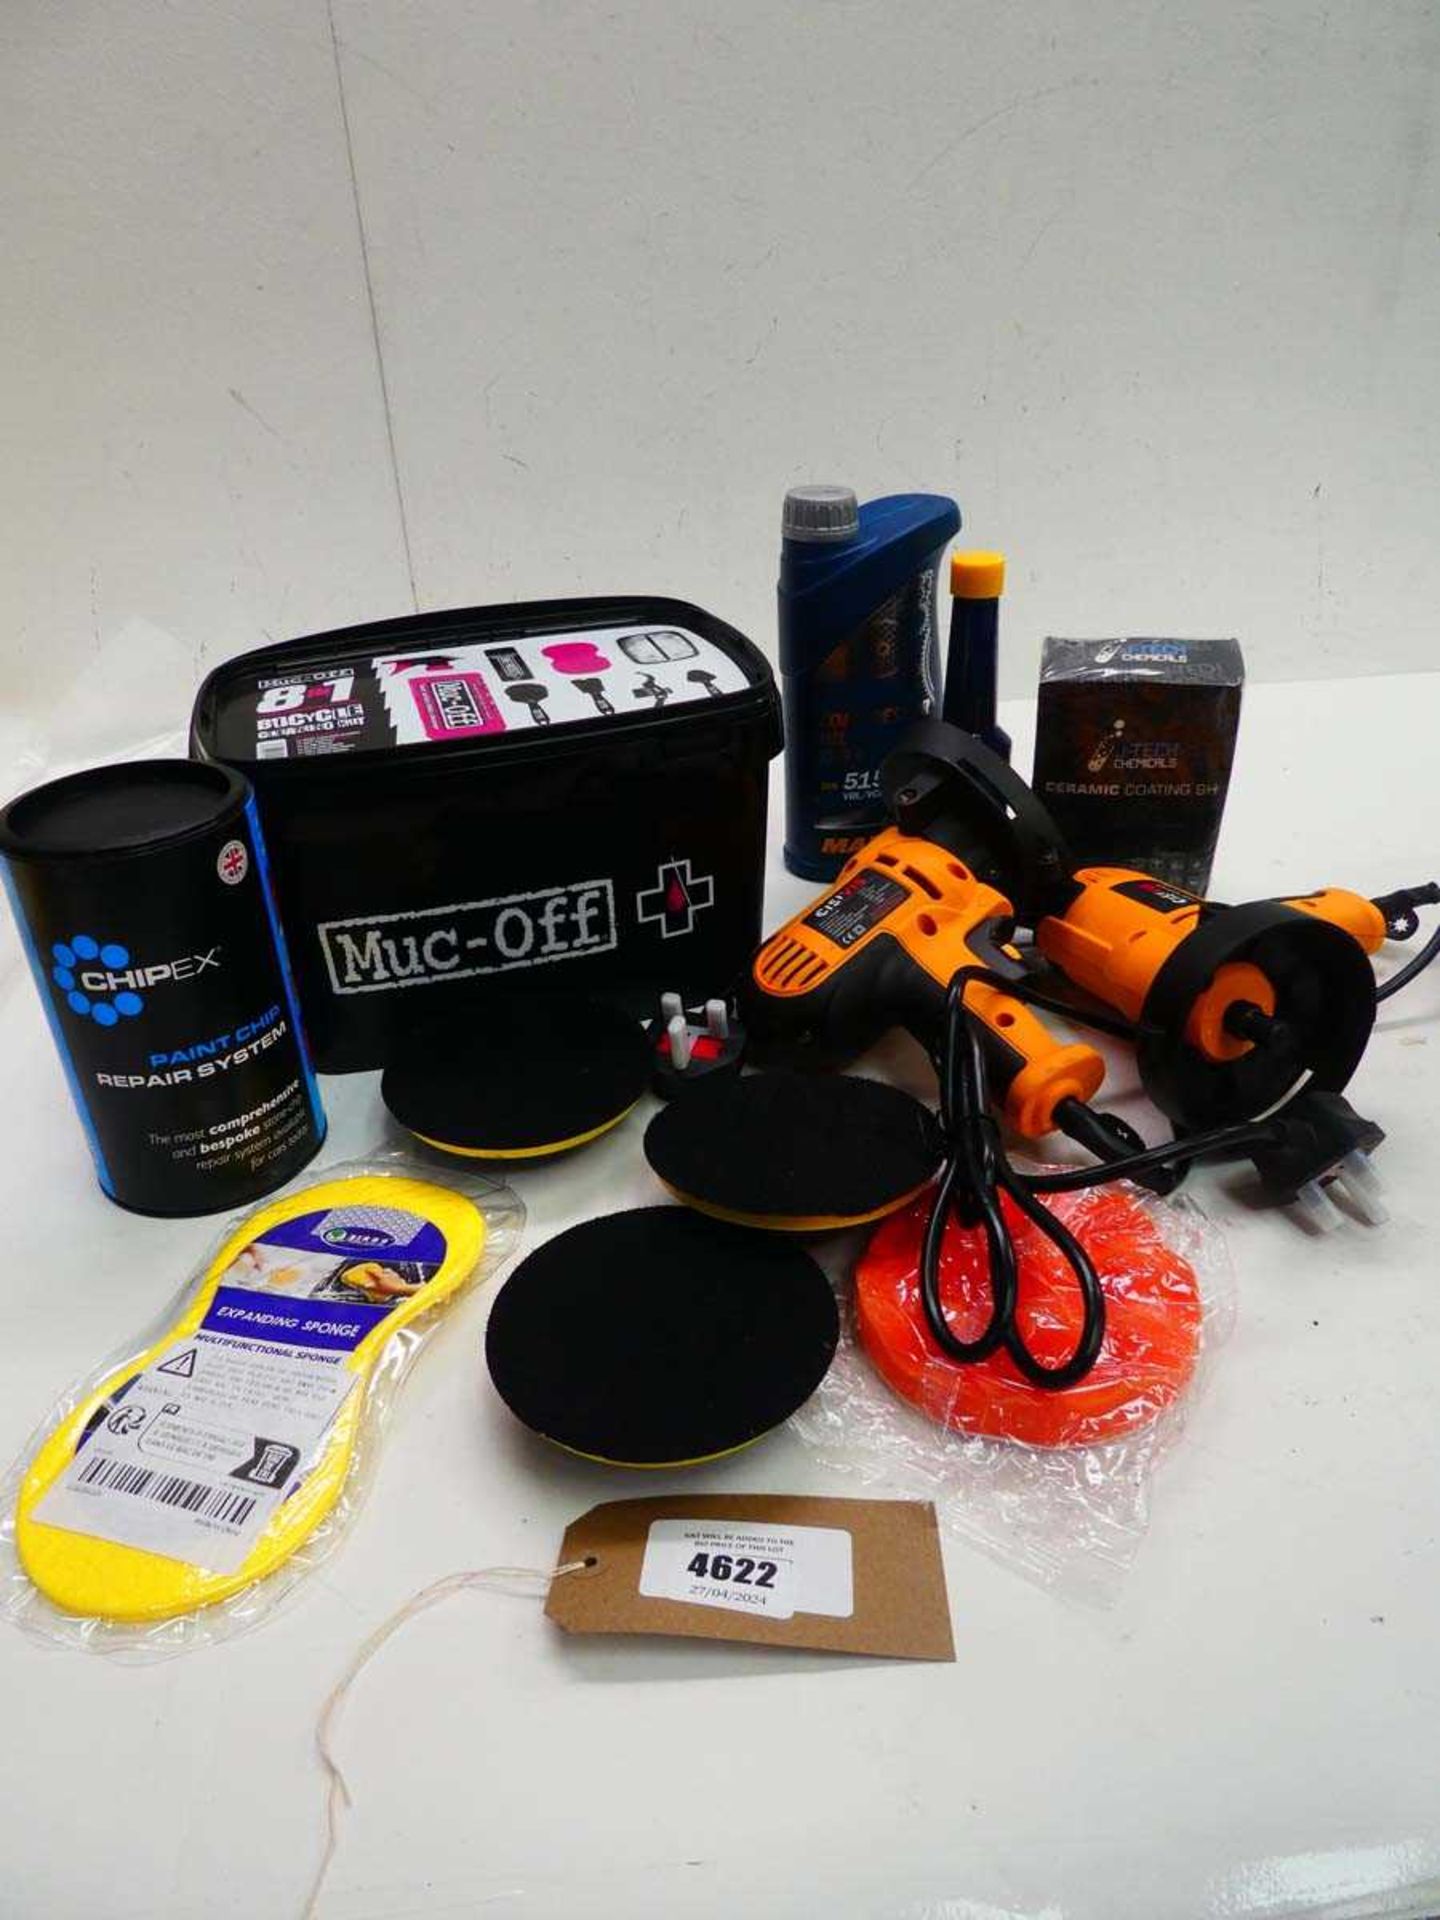 +VAT Car polishers, Muc-Off car cleaning kit, paint chip repair system and other related items